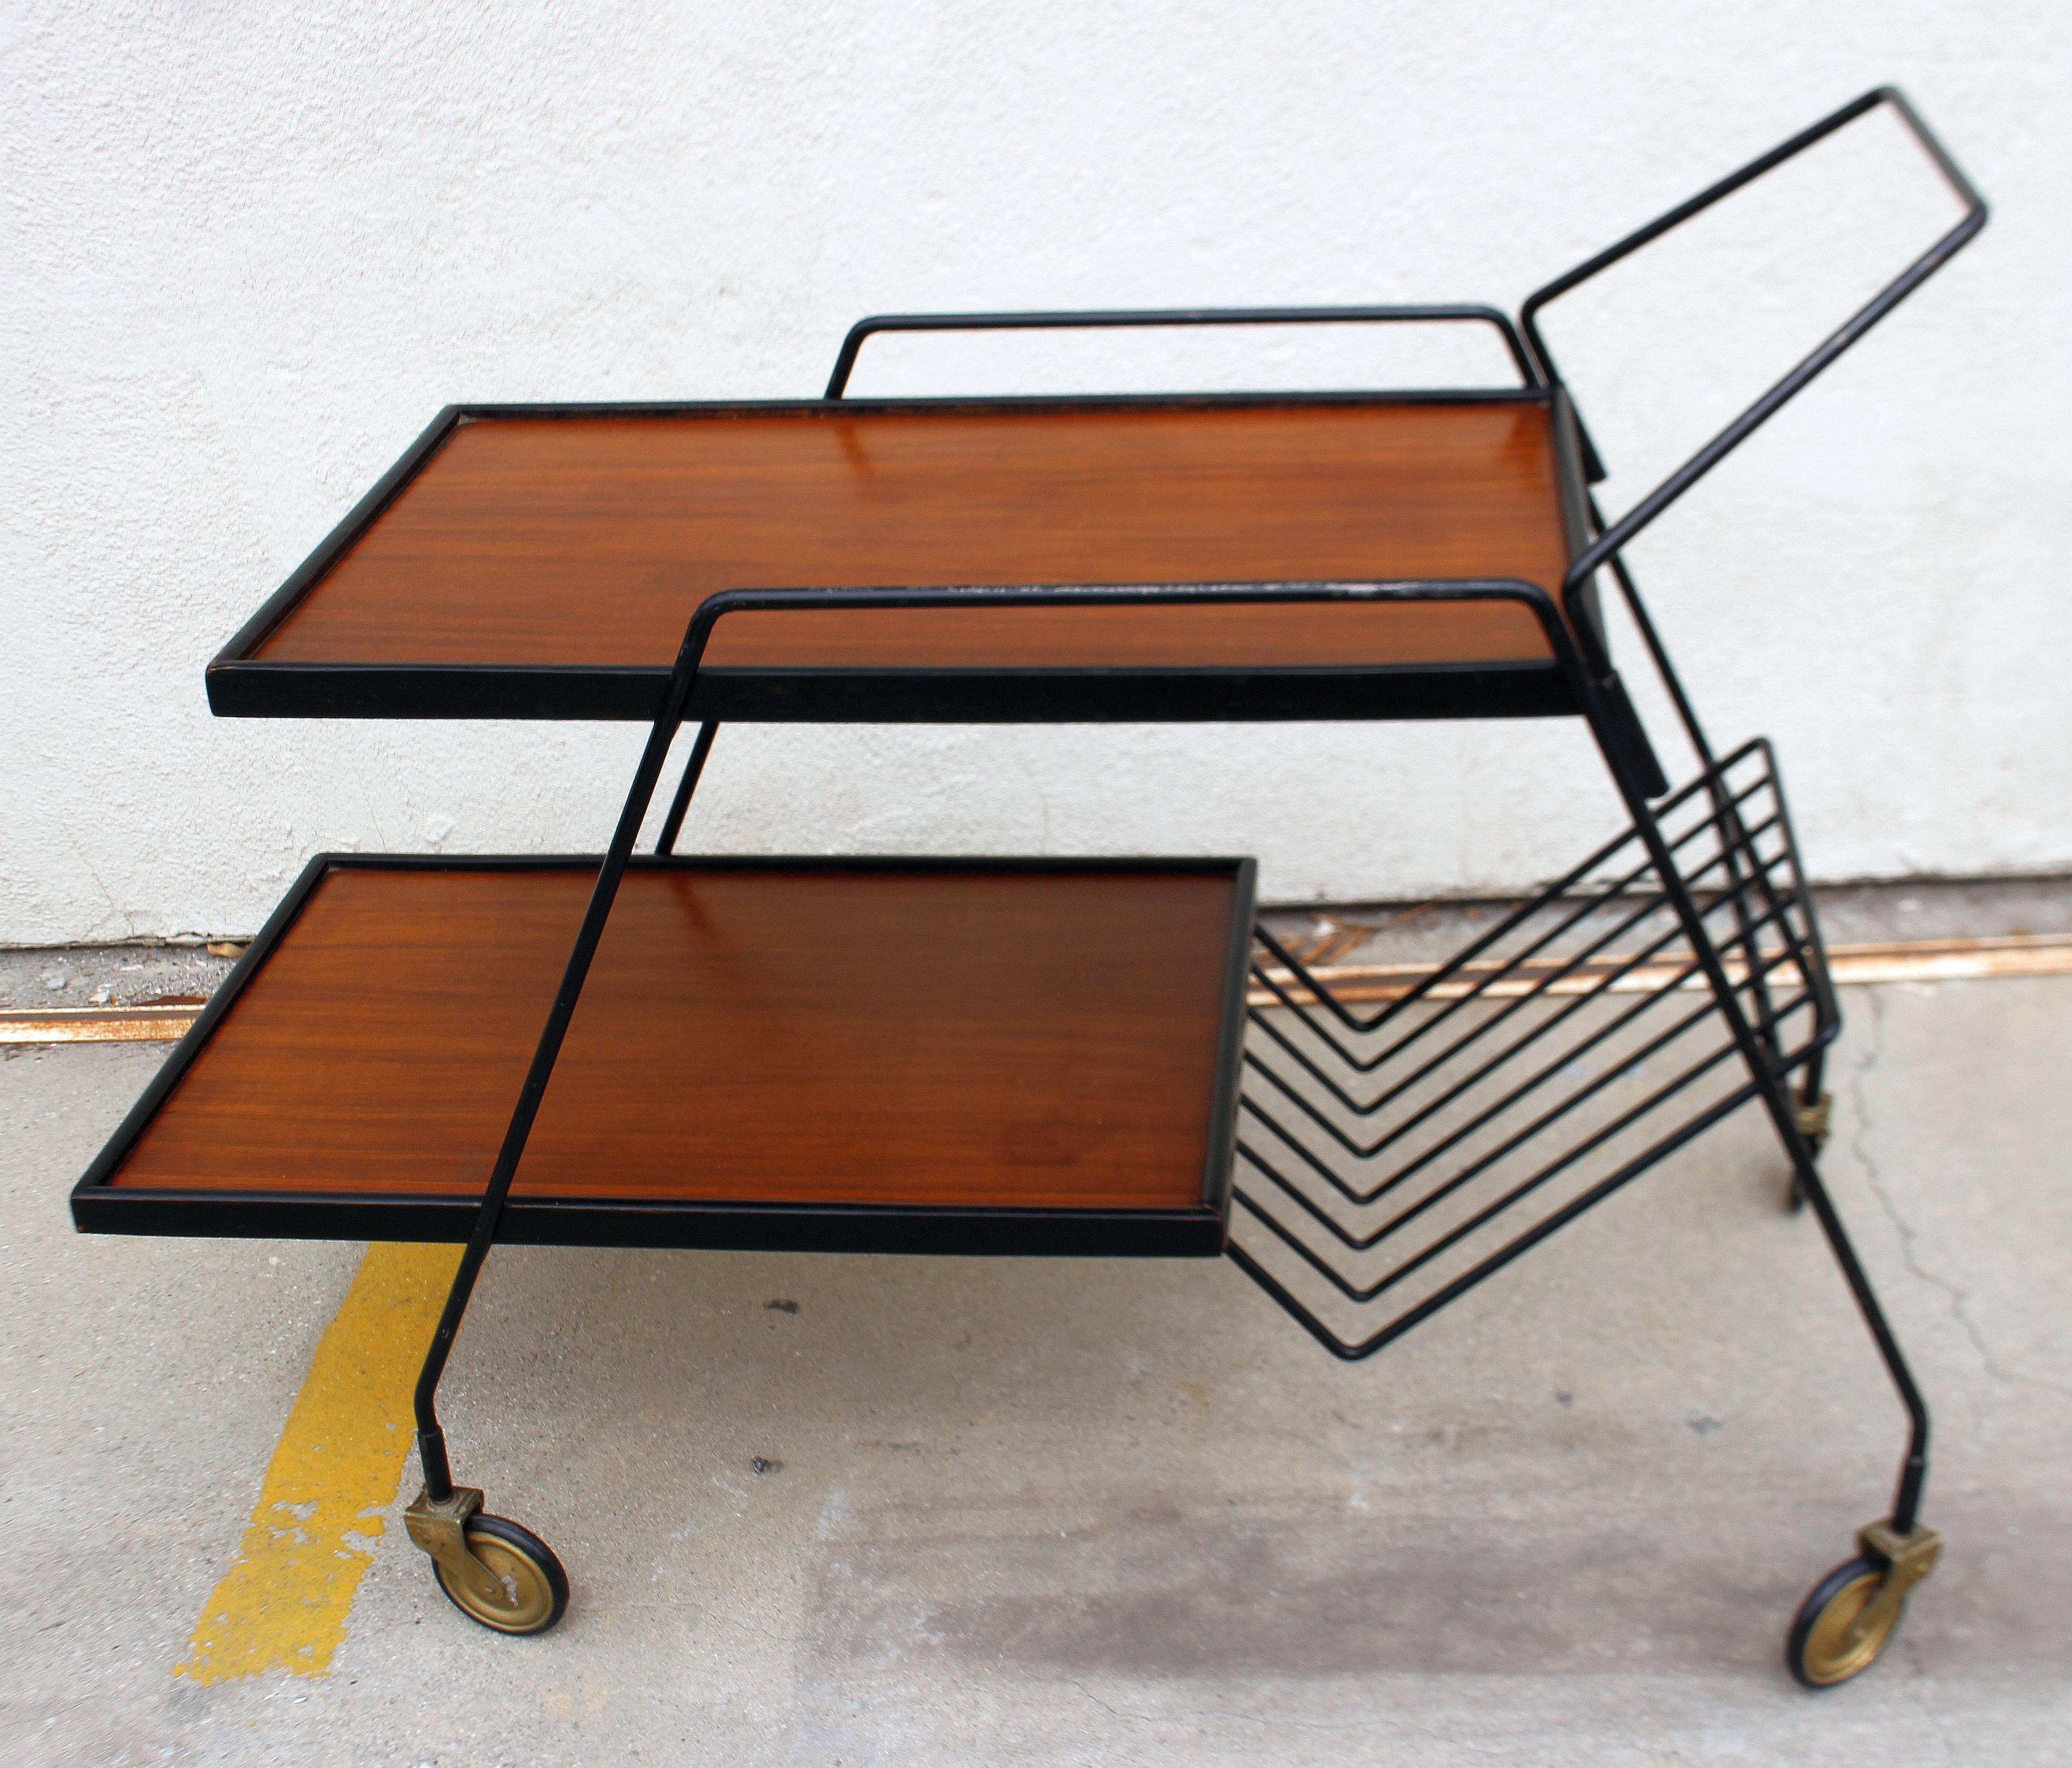 1950s Italian bar cart metal frame mix with the rosewood top. First shelf height is 22 inches.